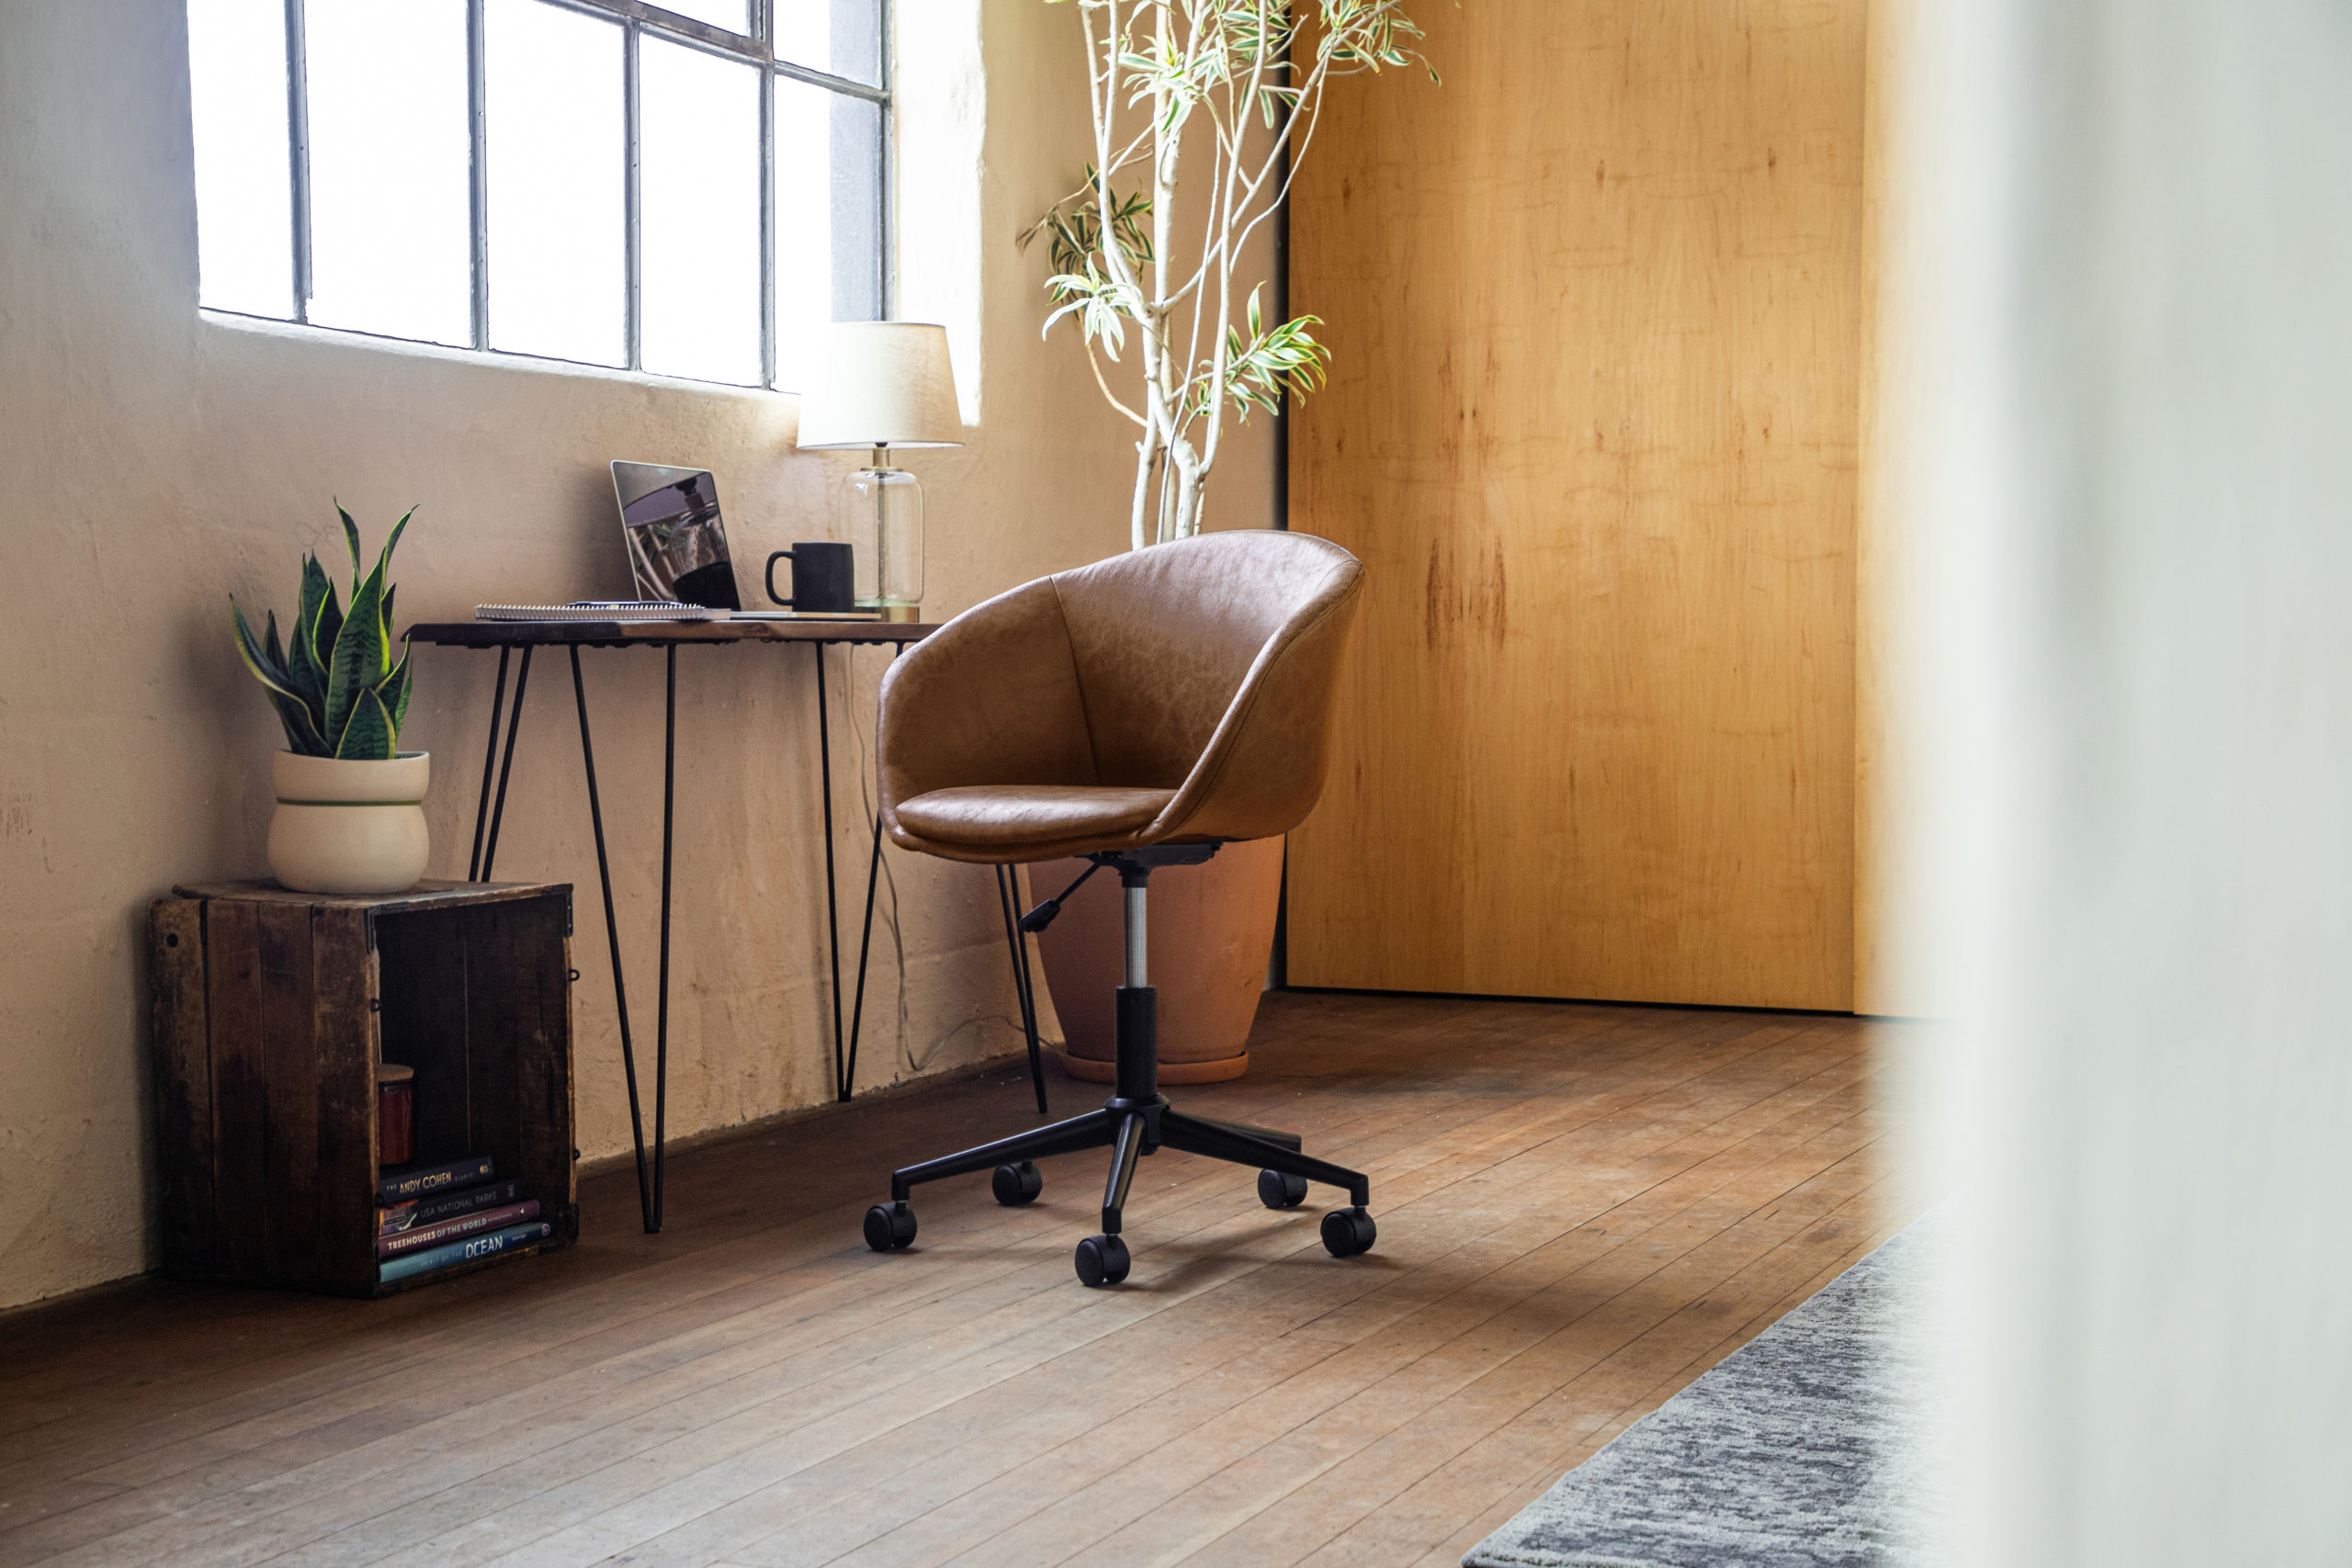 A Wovenbyrd Modern Curved Back Barrel Office Chair in Light Brown Faux Leather sits in a sunny, modern work-from-home office space